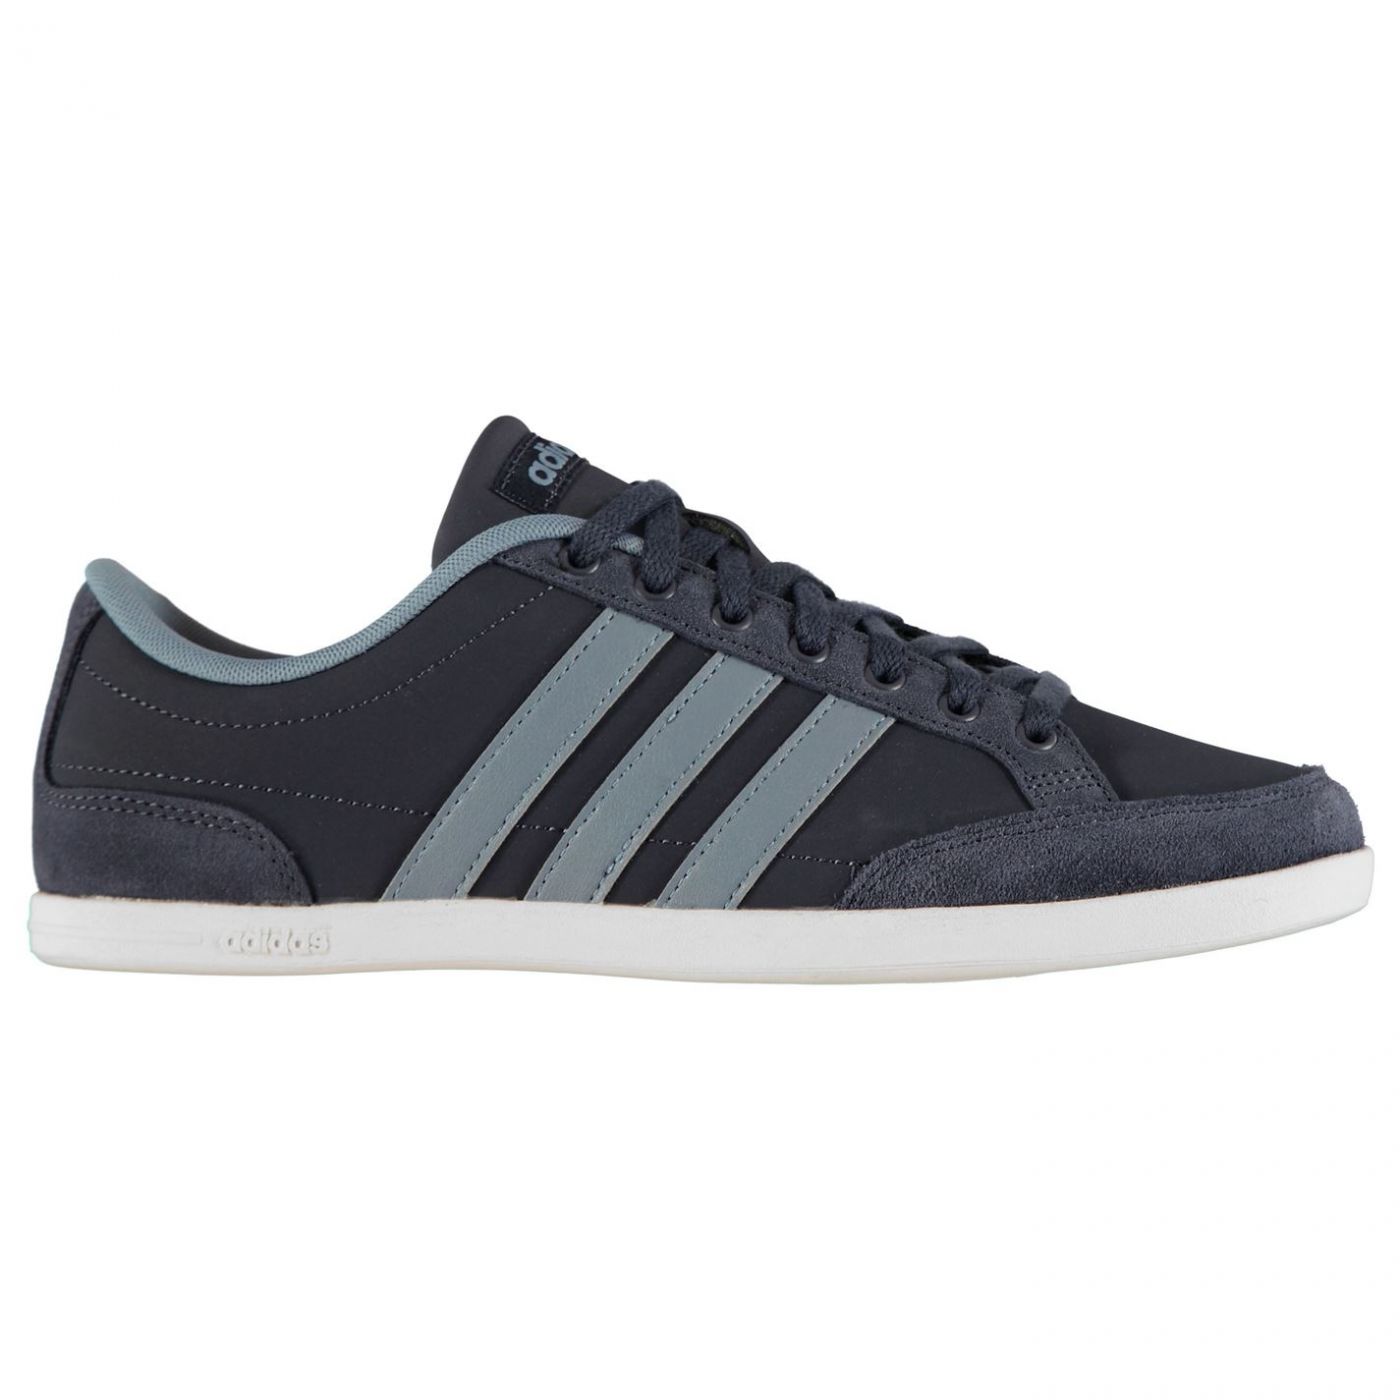 adidas youth boxing shoes